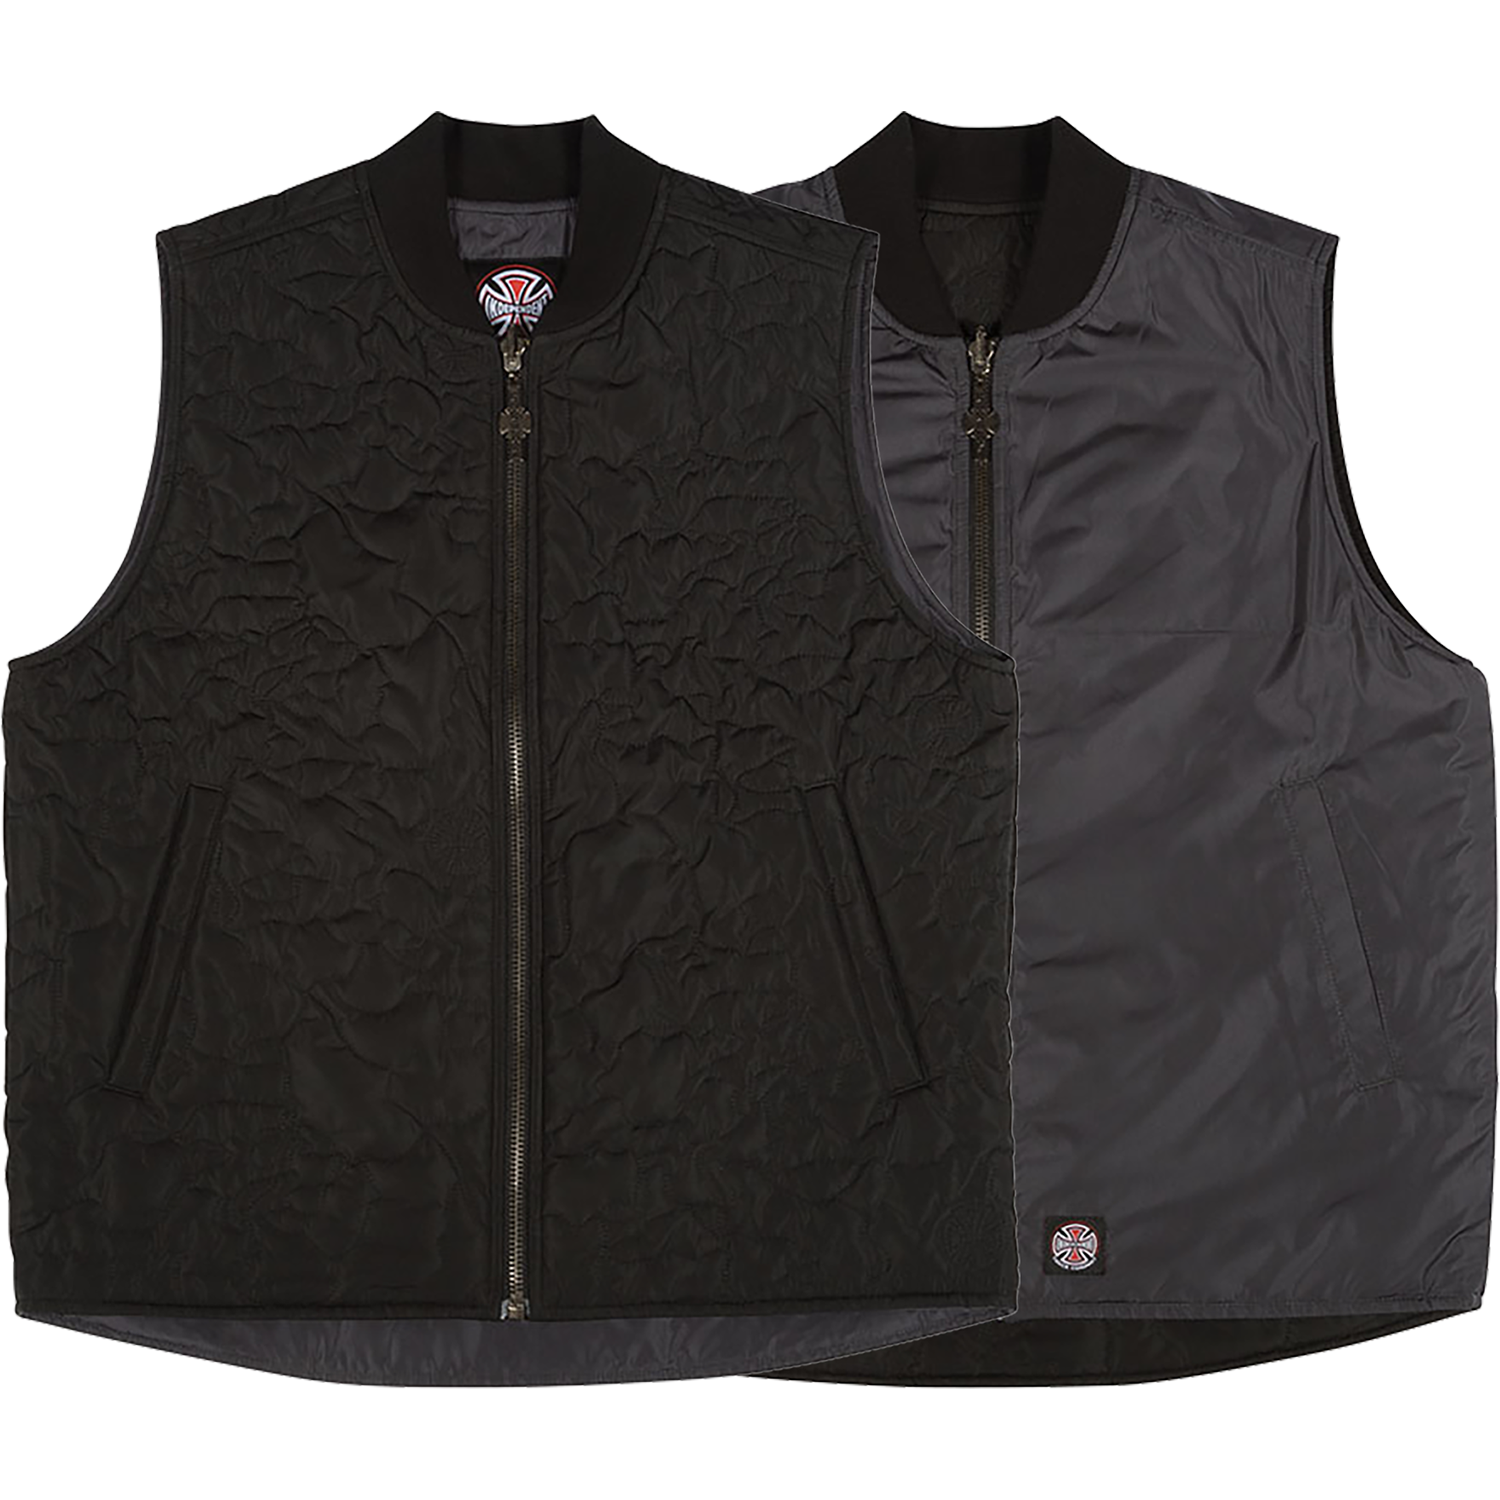 Independent Core Reversible Vest - Small - Black